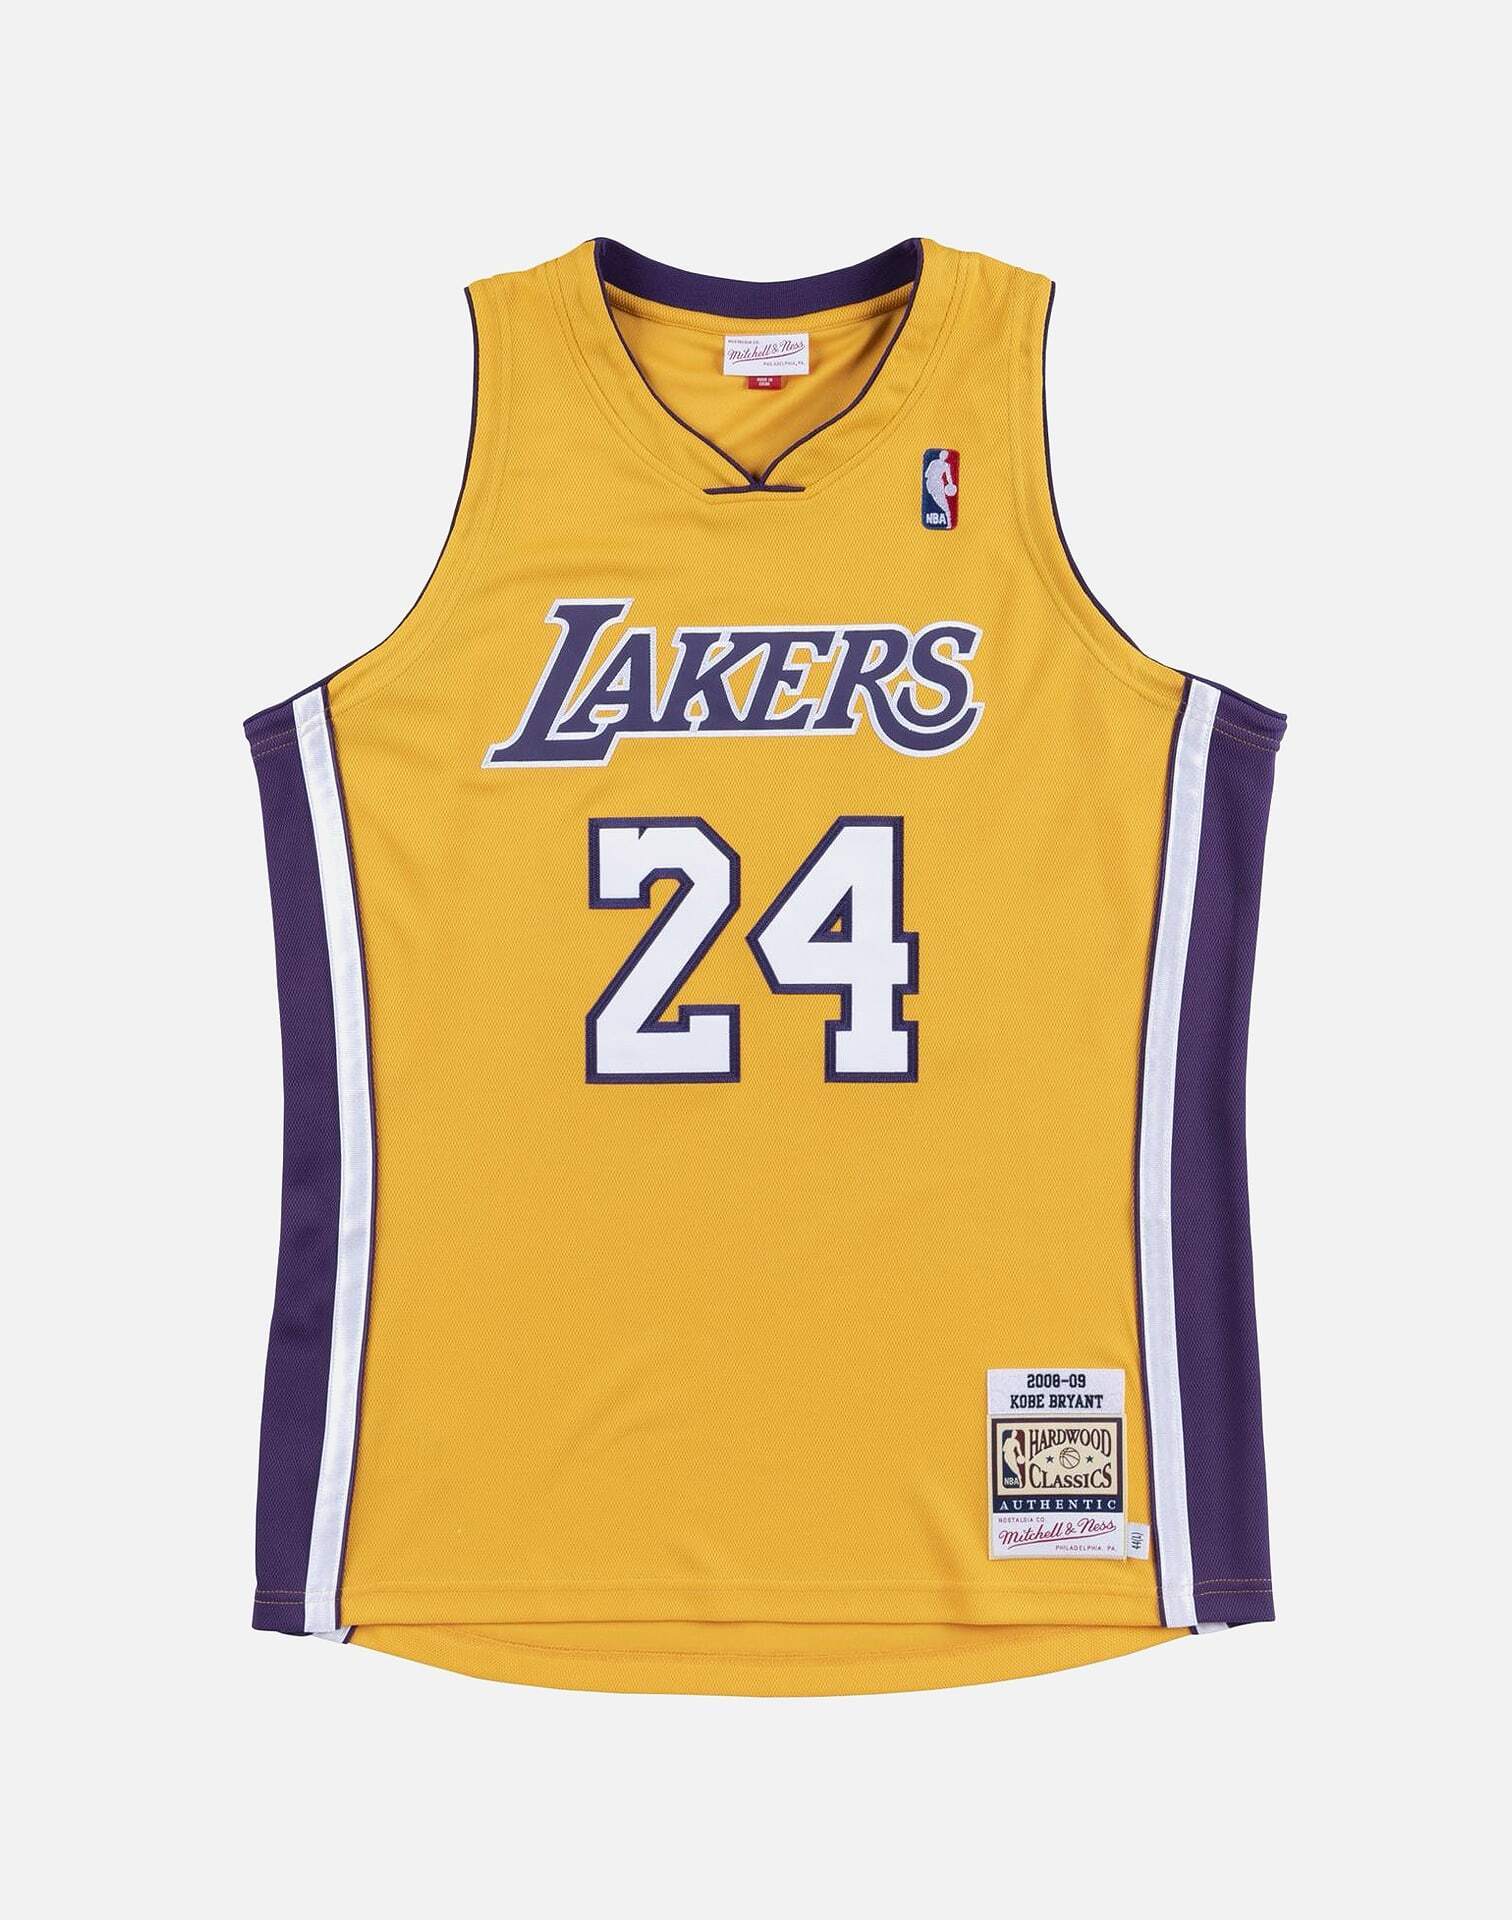 KOBE BRYANT LOS ANGELES LAKERS ALTERNATE 2004-05 AUTHENTIC JERSEY  AJY4CP19005-LALLTBL04KBR